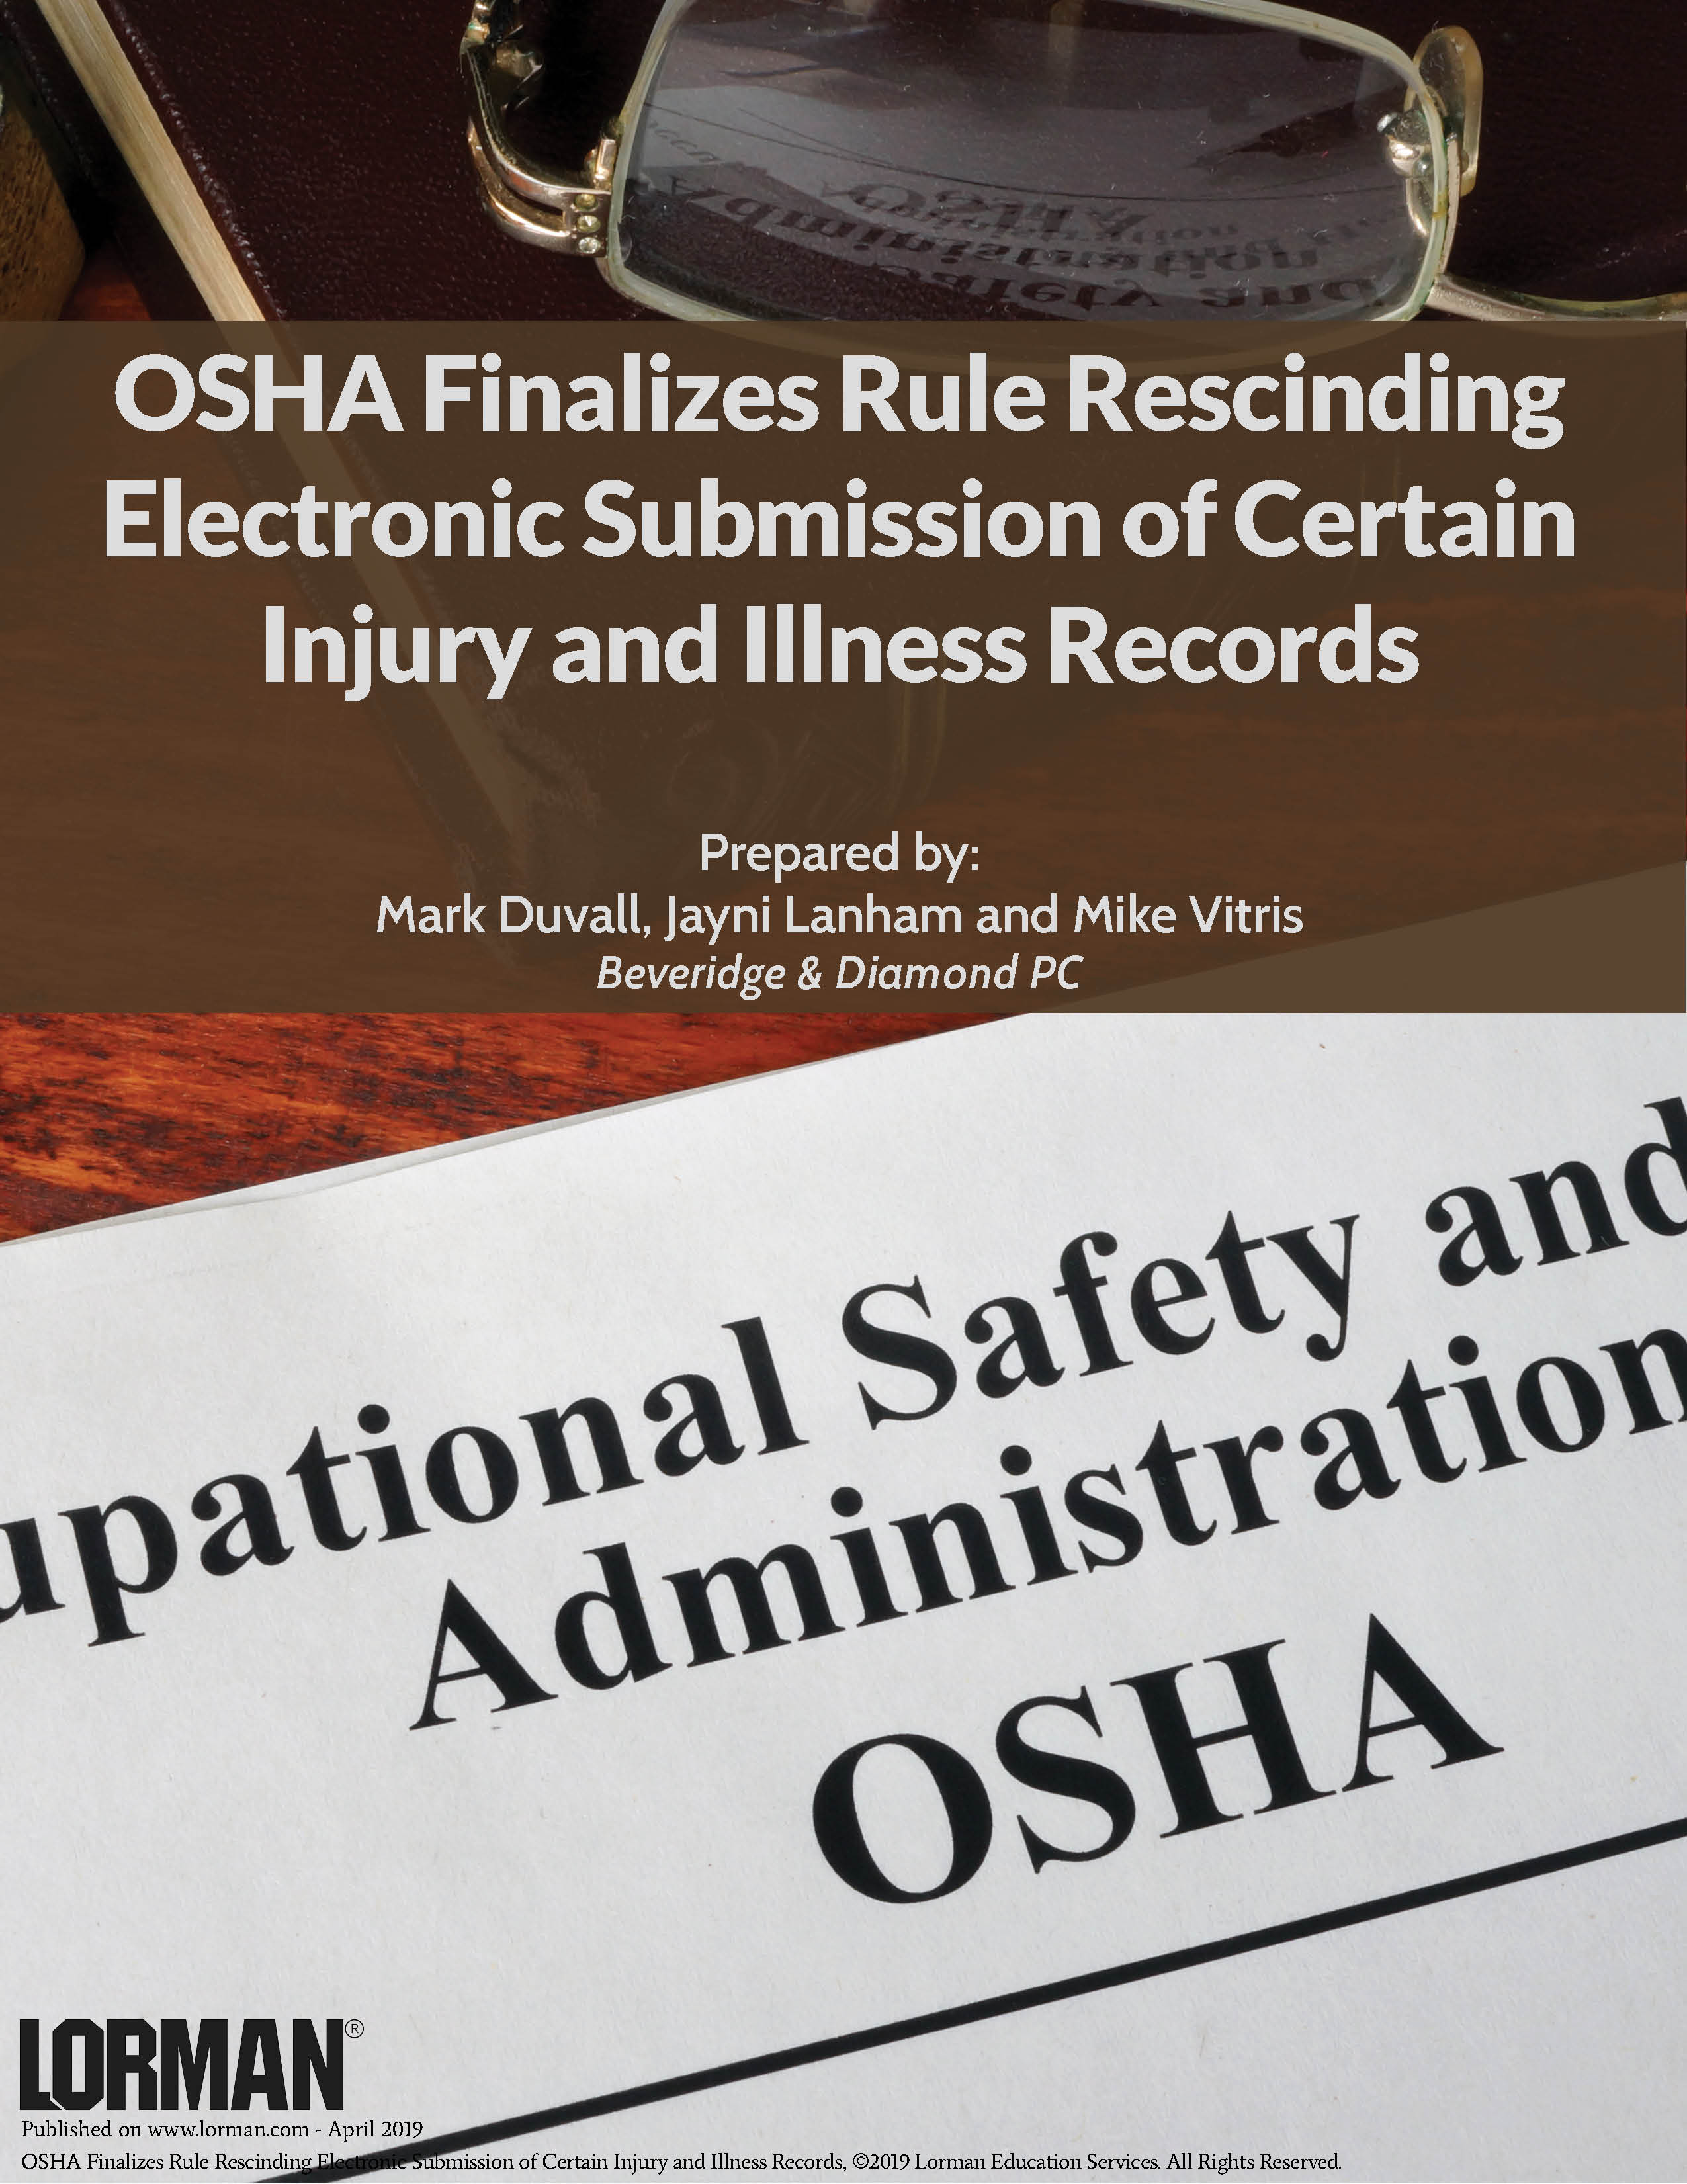 OSHA Finalizes Rule Rescinding Electronic Submission of Certain Injury and Illness Records